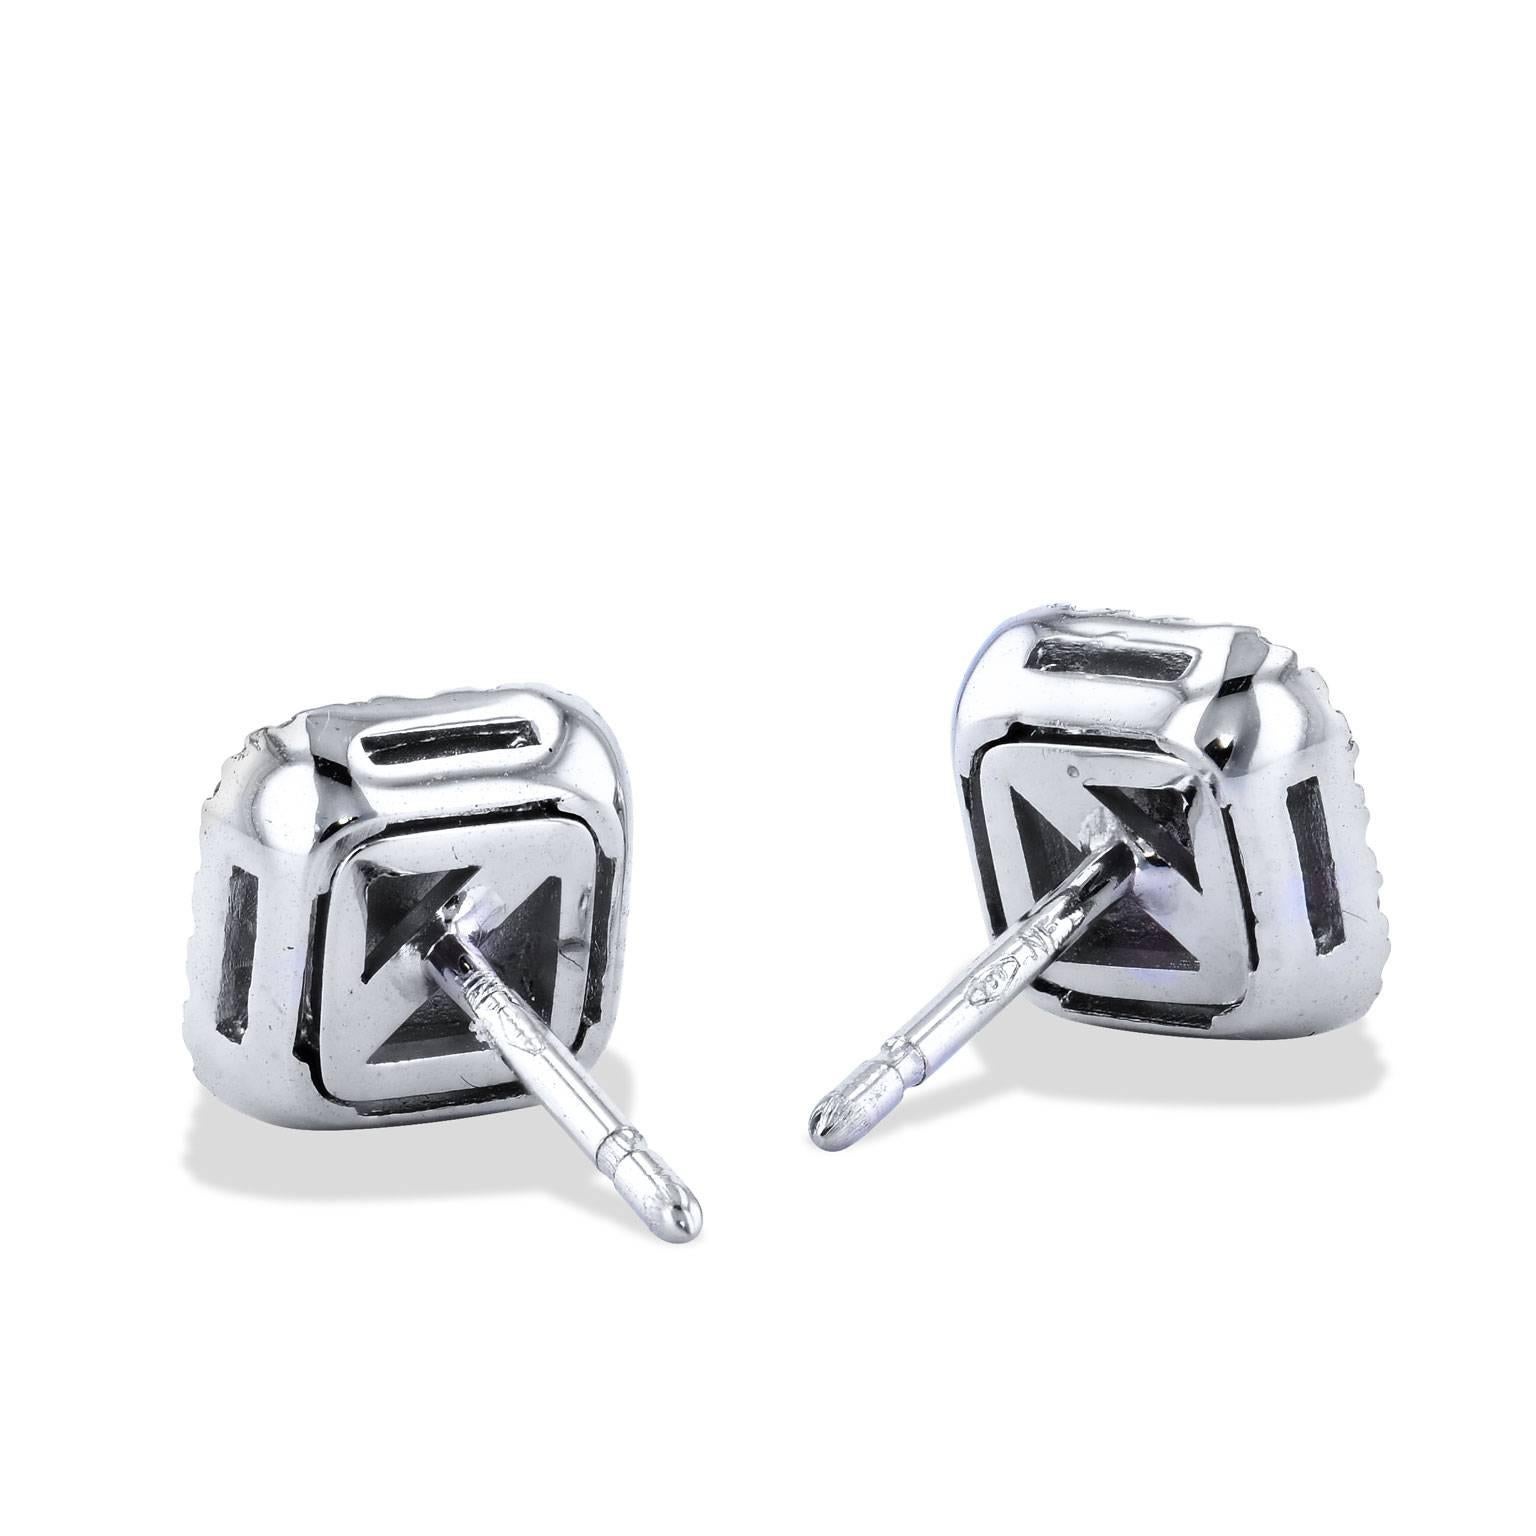 Italian designer 18 karat white gold square-shaped pave diamond stud earrings featuring a pave diamond halo with a total weight of 0.56 carat (G/VS).